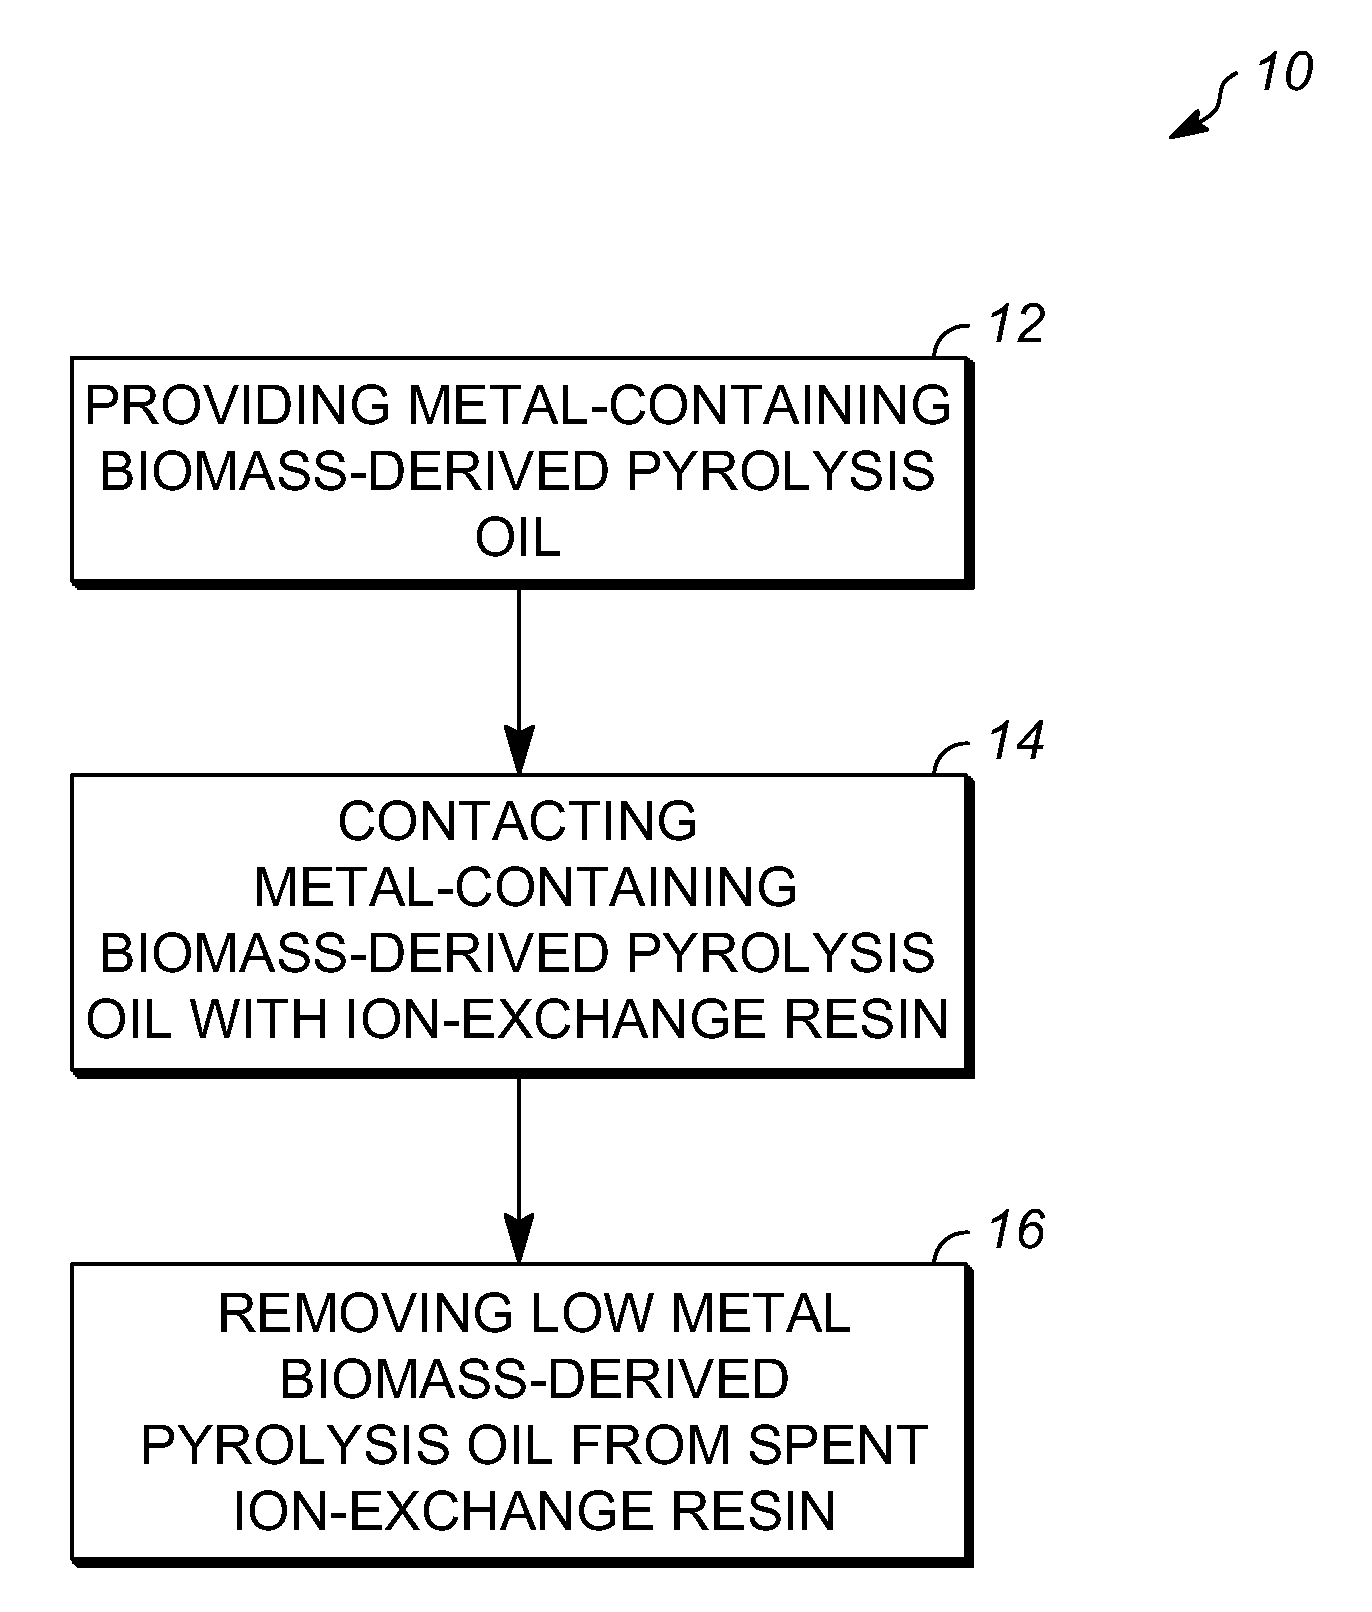 Low metal biomass-derived pyrolysis oils and processes for producing the same